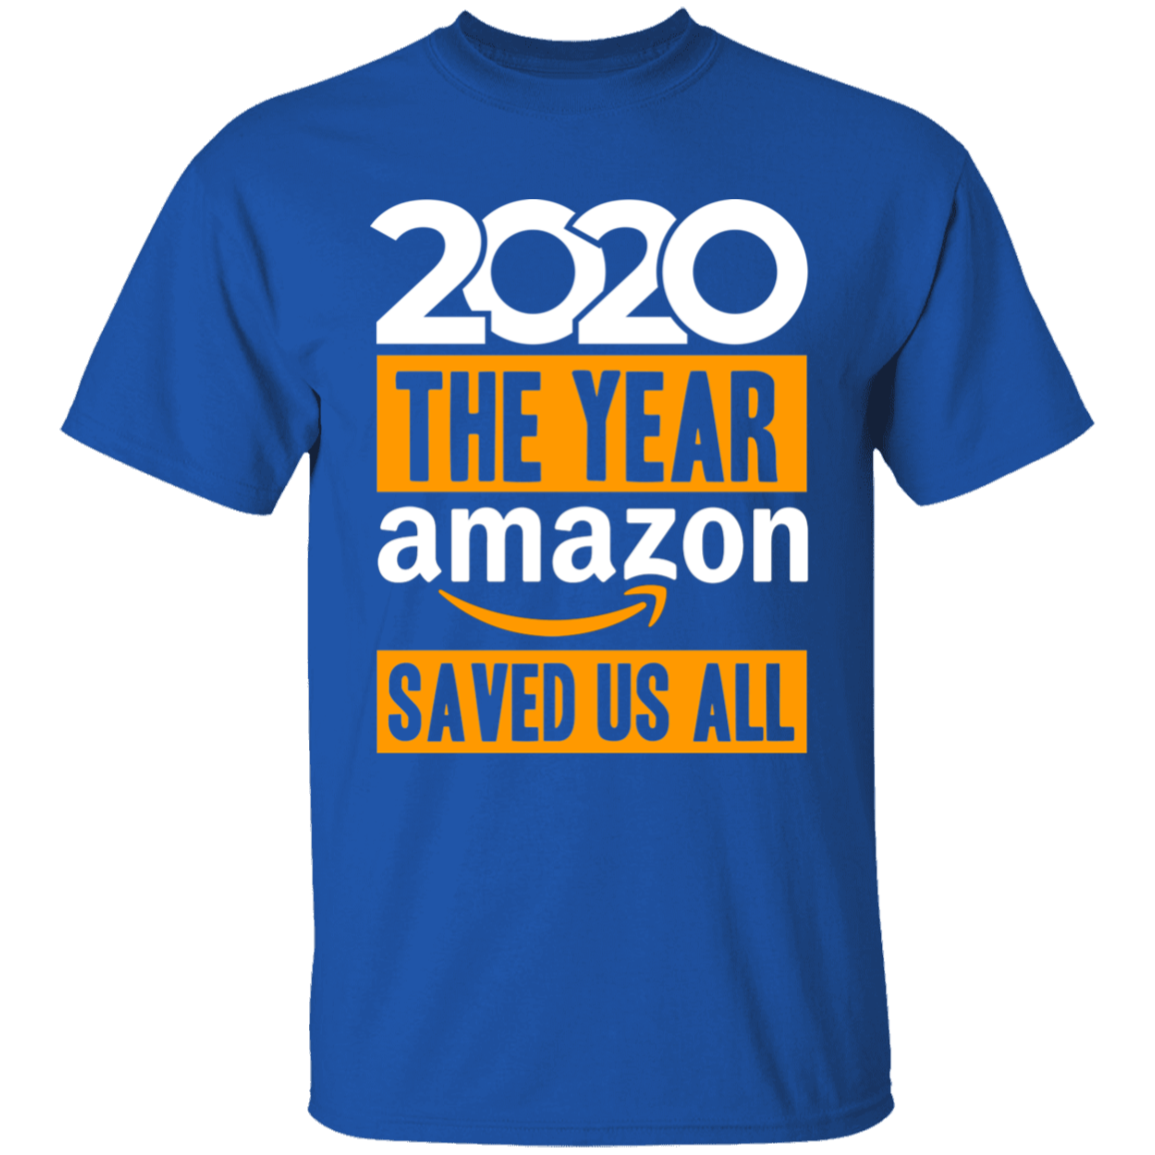 2020 The Year Amazon Saved Us All Apparel